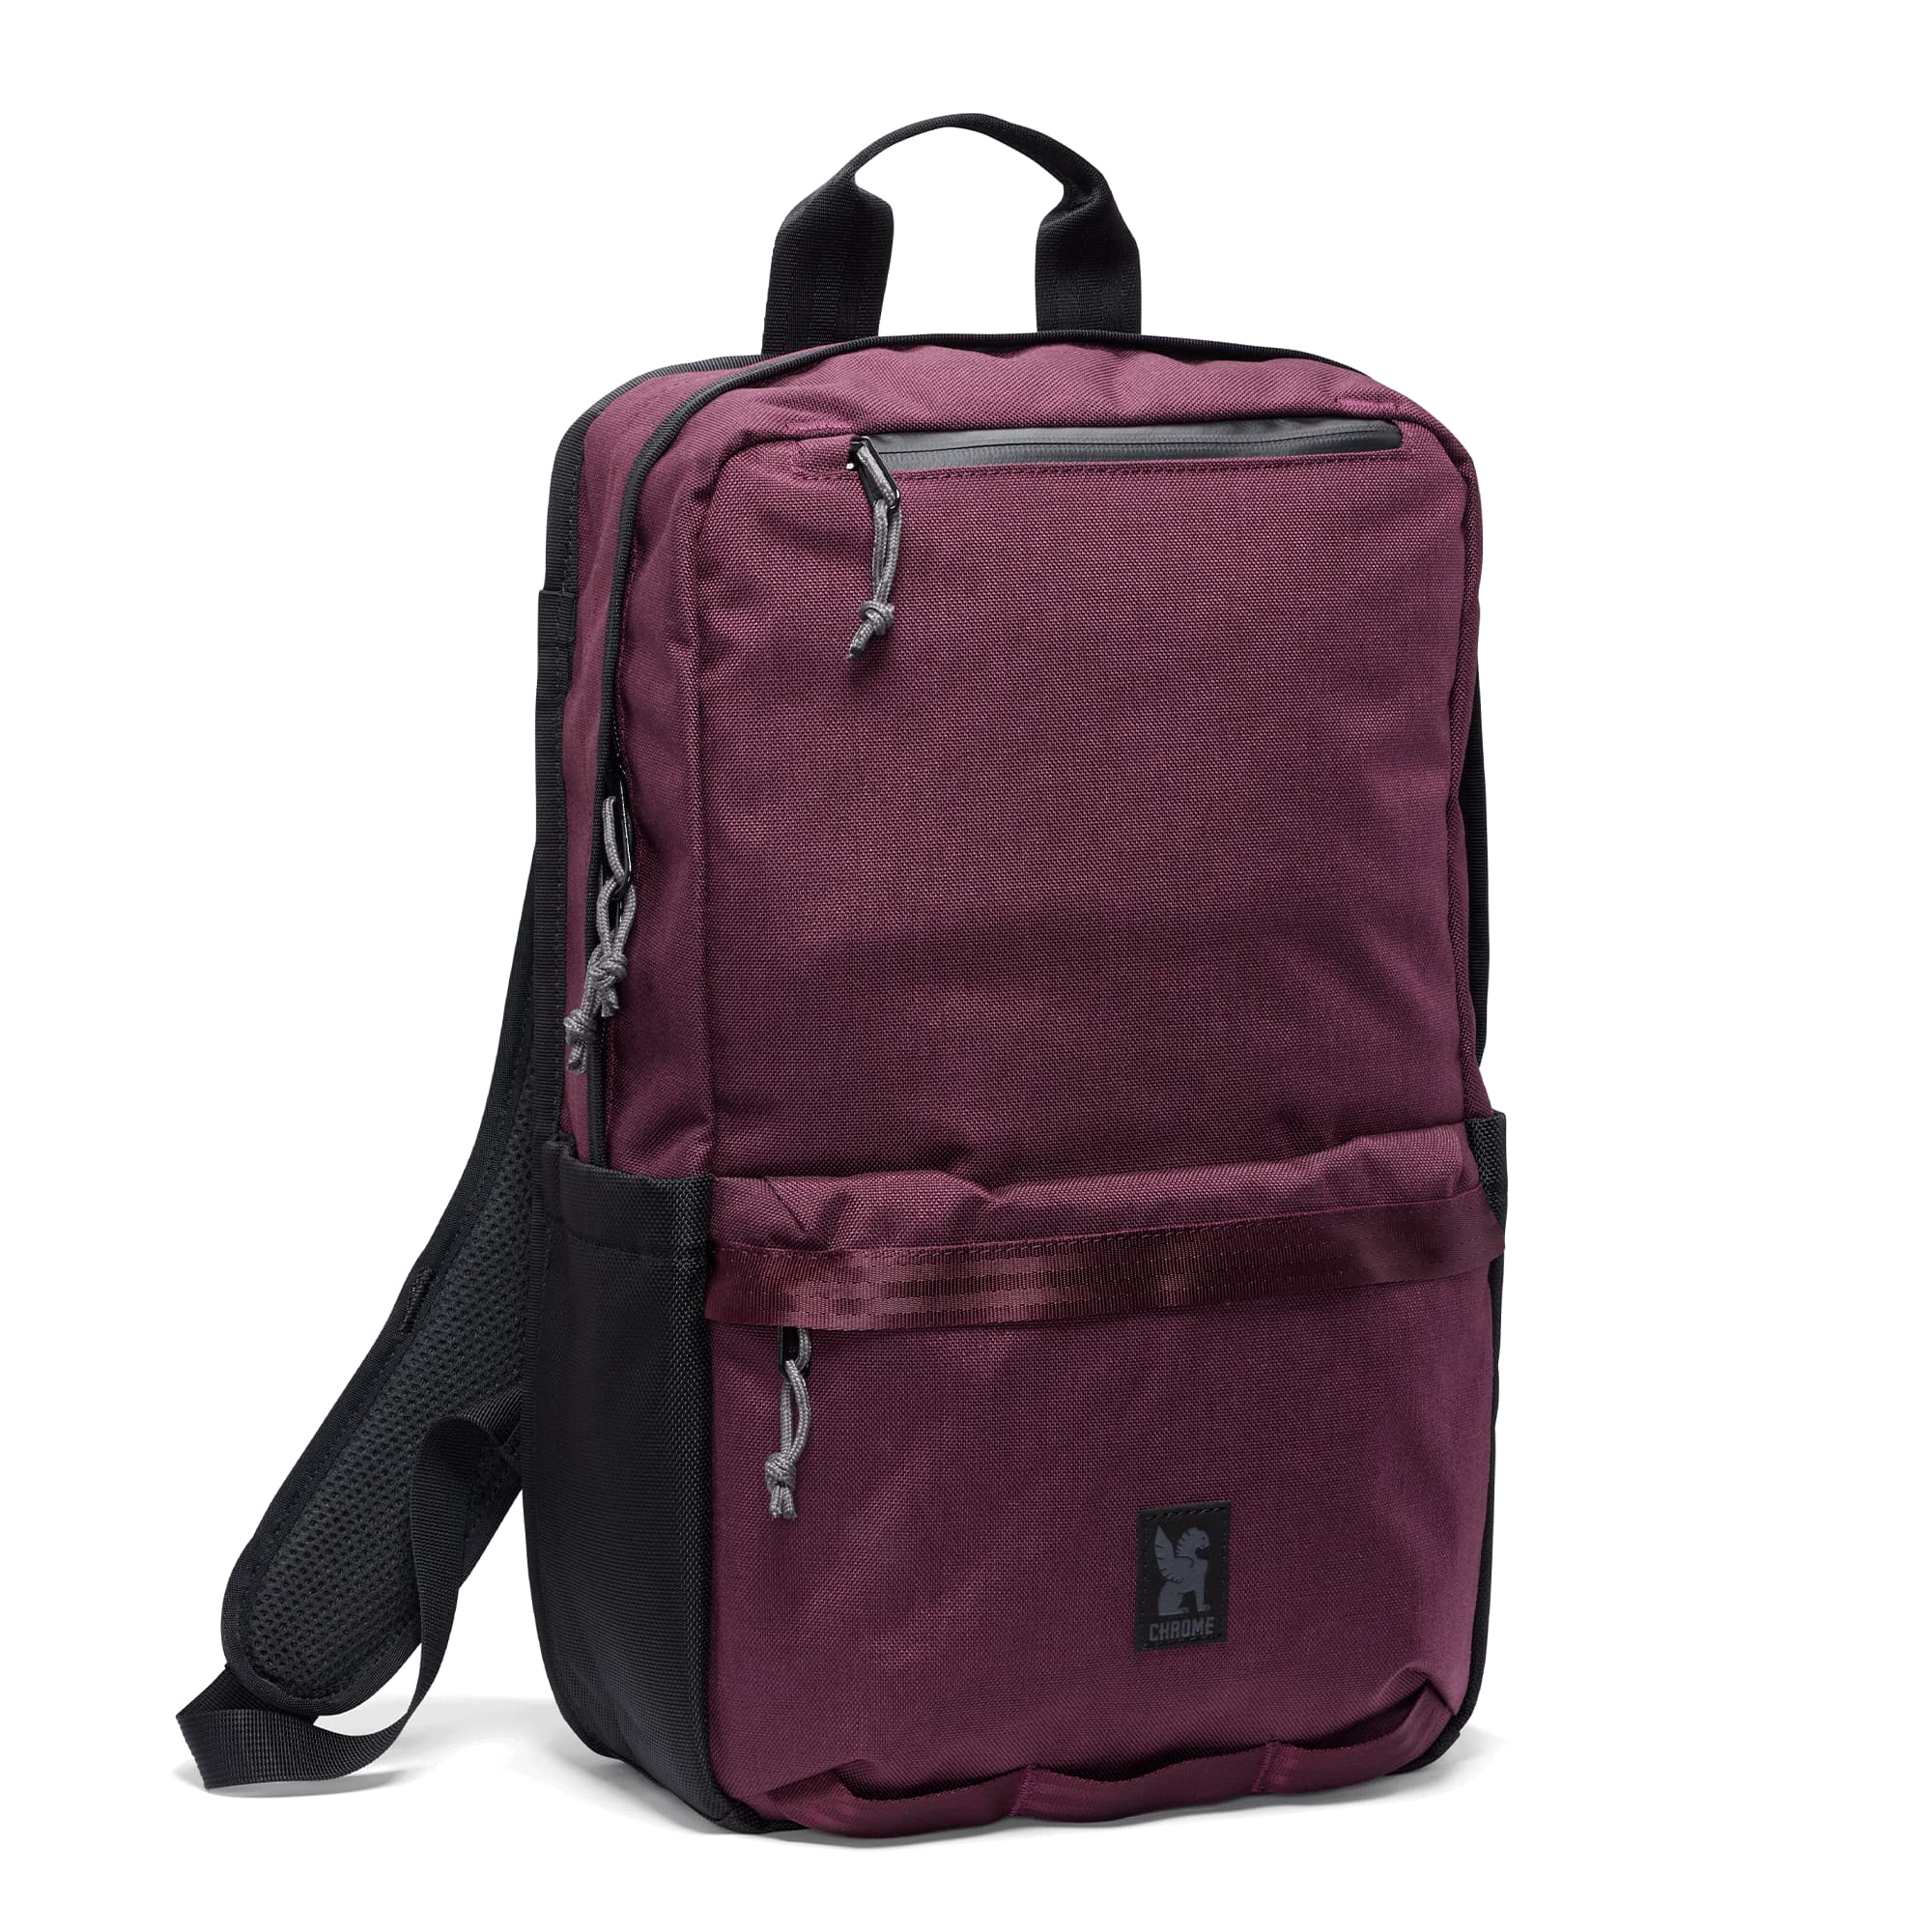 The new Hondo 18L backpack in purple #color_royale